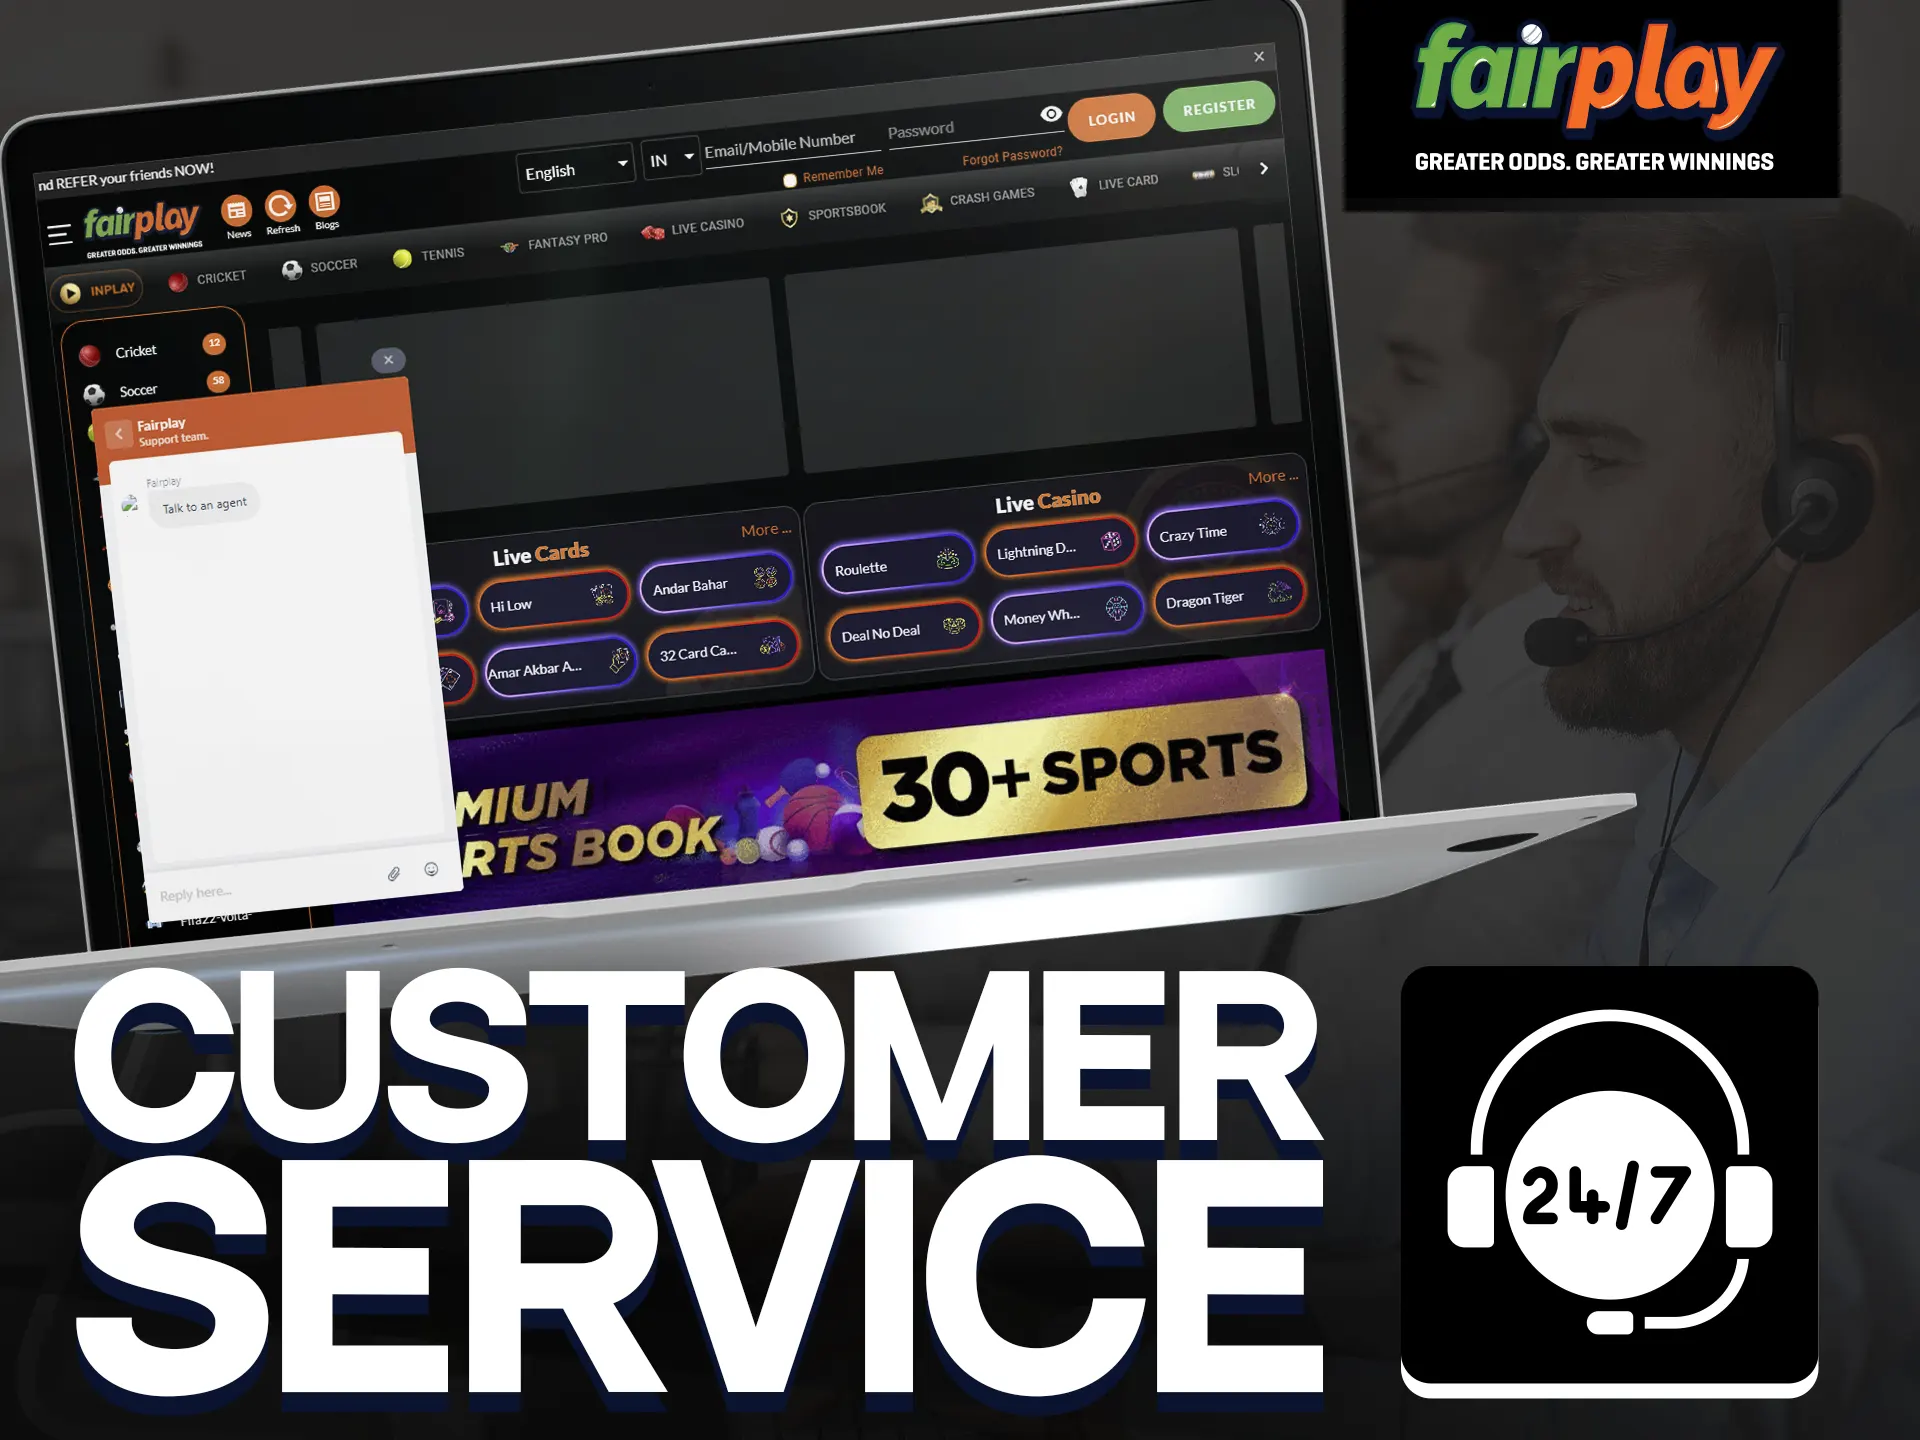 Enjoy the great customer service at Fairplay to solve every problem you`re facing.